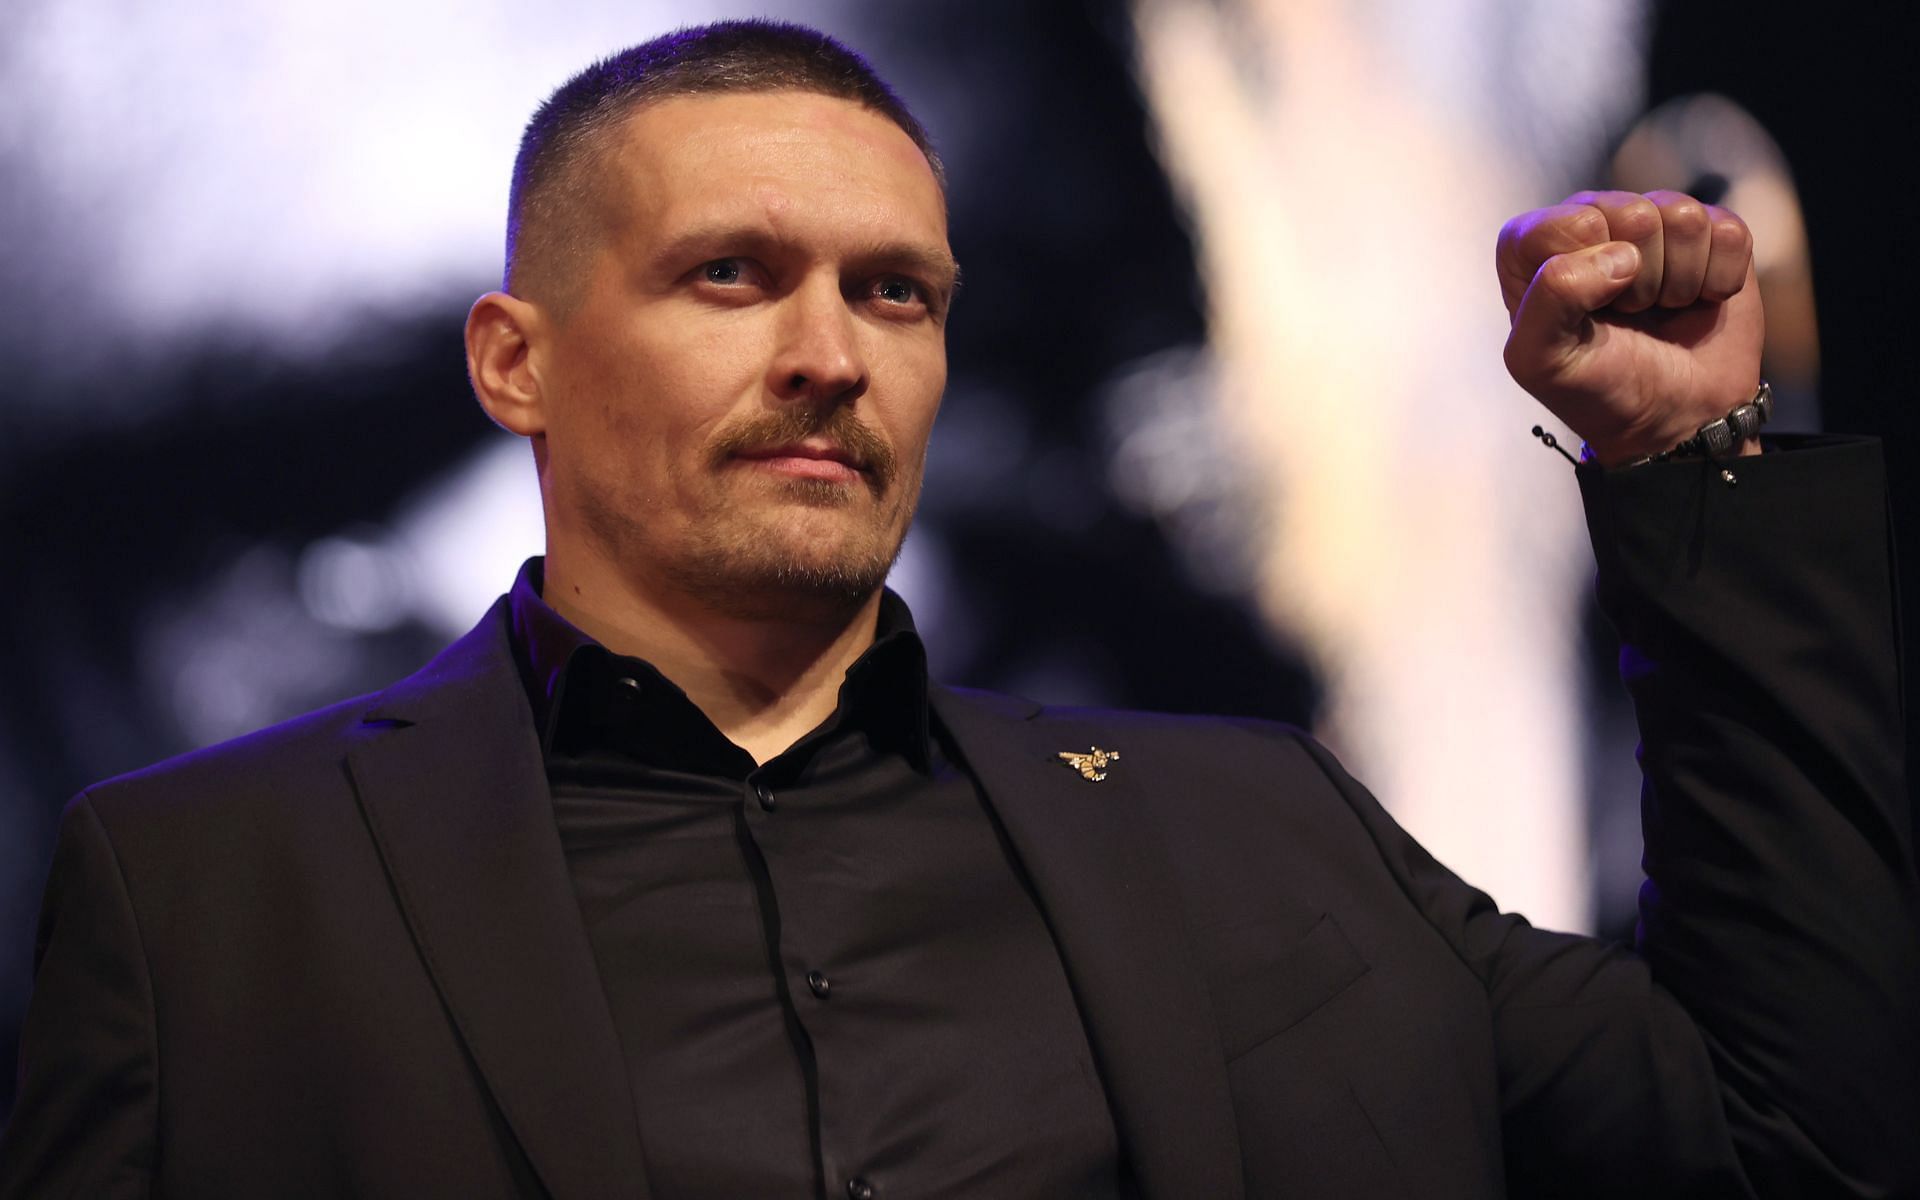 Oleksandr Usyk has his sights set on making history by becoming boxing